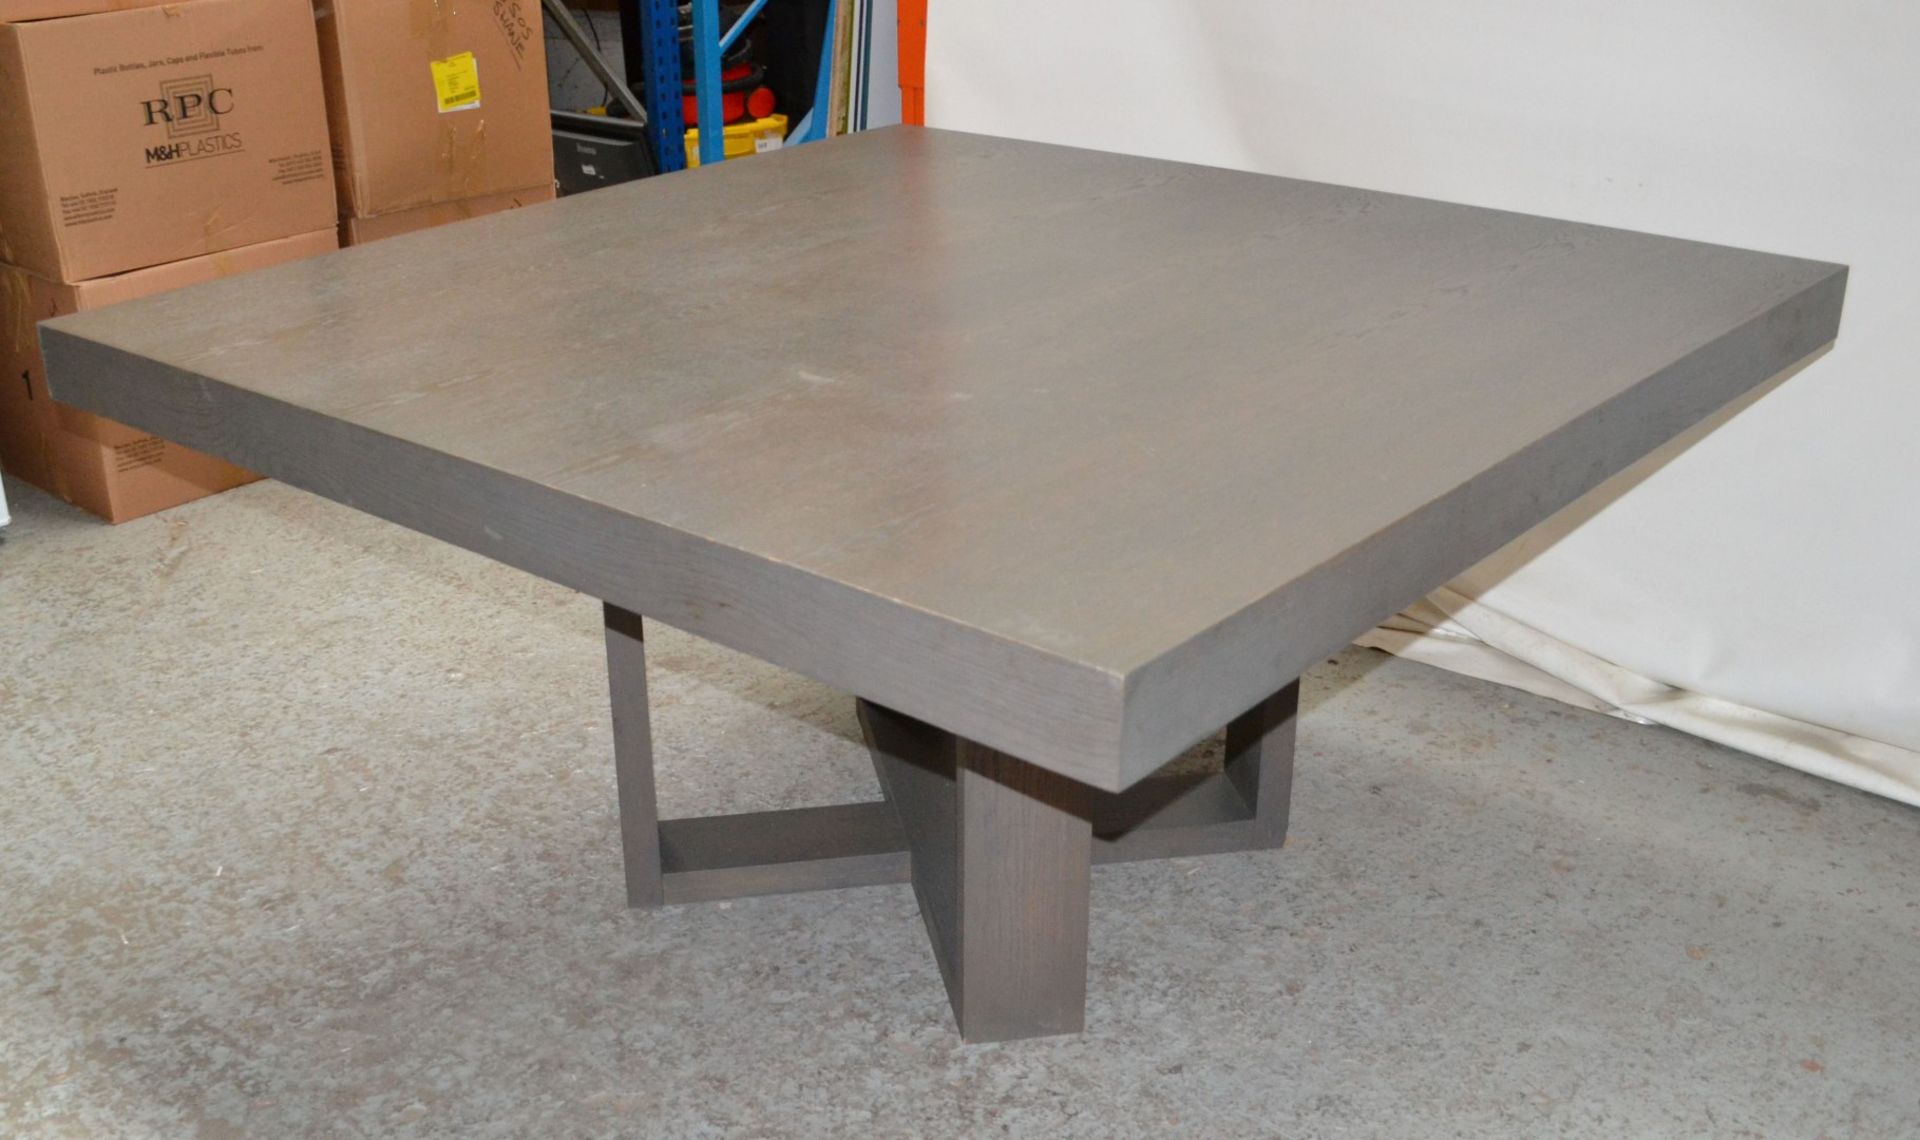 1 x Large Square Wooden Dining Table in a Grey Oak Coloured Finish - CL314 - Location: Altrincham - Image 9 of 10